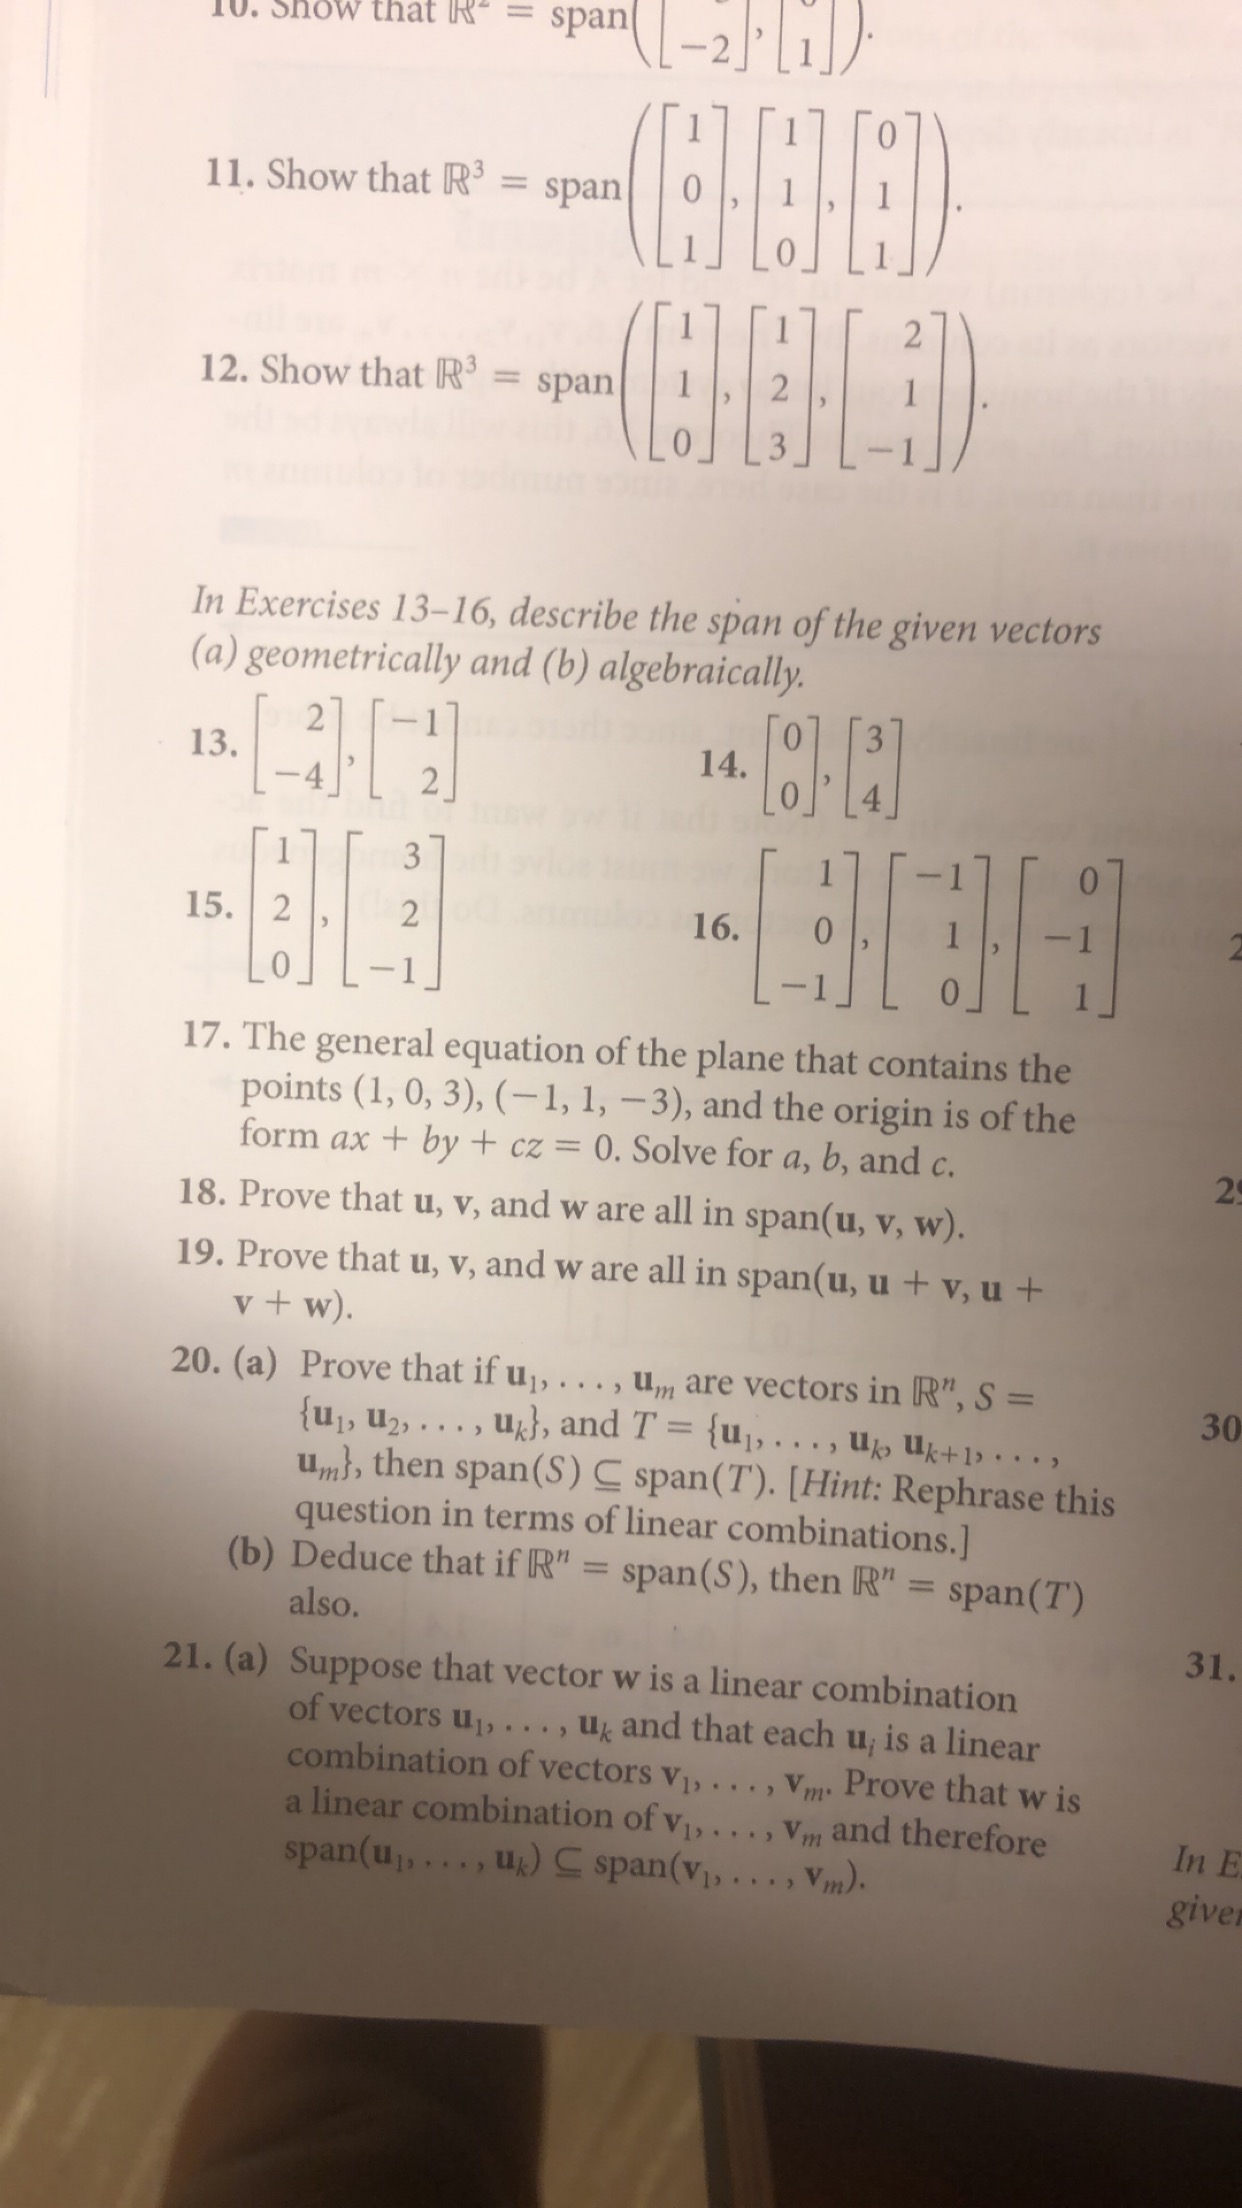 span
0. Show that R-.
1
11. Show that R3
span
12. Show that R3
span
In Exercises 13-16, describe the span of the given vectors
(a) geometrically and (b) algebraically.
2
13.
3
14.
3
15. 2
2
16.
2
17. The general equation of the plane that contains the
points (1, 0, 3), (-1, 1, -3), and the origin is of the
form ax by +cz = 0. Solve for a, b, and c.
2
18. Prove that u, v, and w are all in span(u, v, w).
19. Prove that u, v, and w are all in span(u, u+ v, u +
v+w)
20. (a) Prove that if u,..
, are vectors in R", S =
u, u2,.. ., u}, and T = {u1, . . , U uk+1. .
un n, then span(S) C span(T). [Hint: Rephrase this
question in terms of linear combinations.]
(b) Deduce that if R" = span(S), then R" = span ( T)
30
also.
31.
21. (a) Suppose that vector w is a linear combination
of vectors u, . . , u and that each u, is a linear
combination of vectors v, . . , V Prove that w is
a linear combination of v,.. . , Vm and therefore
span(u,,..., uk) span(vi,..,v,,)
In E
give
